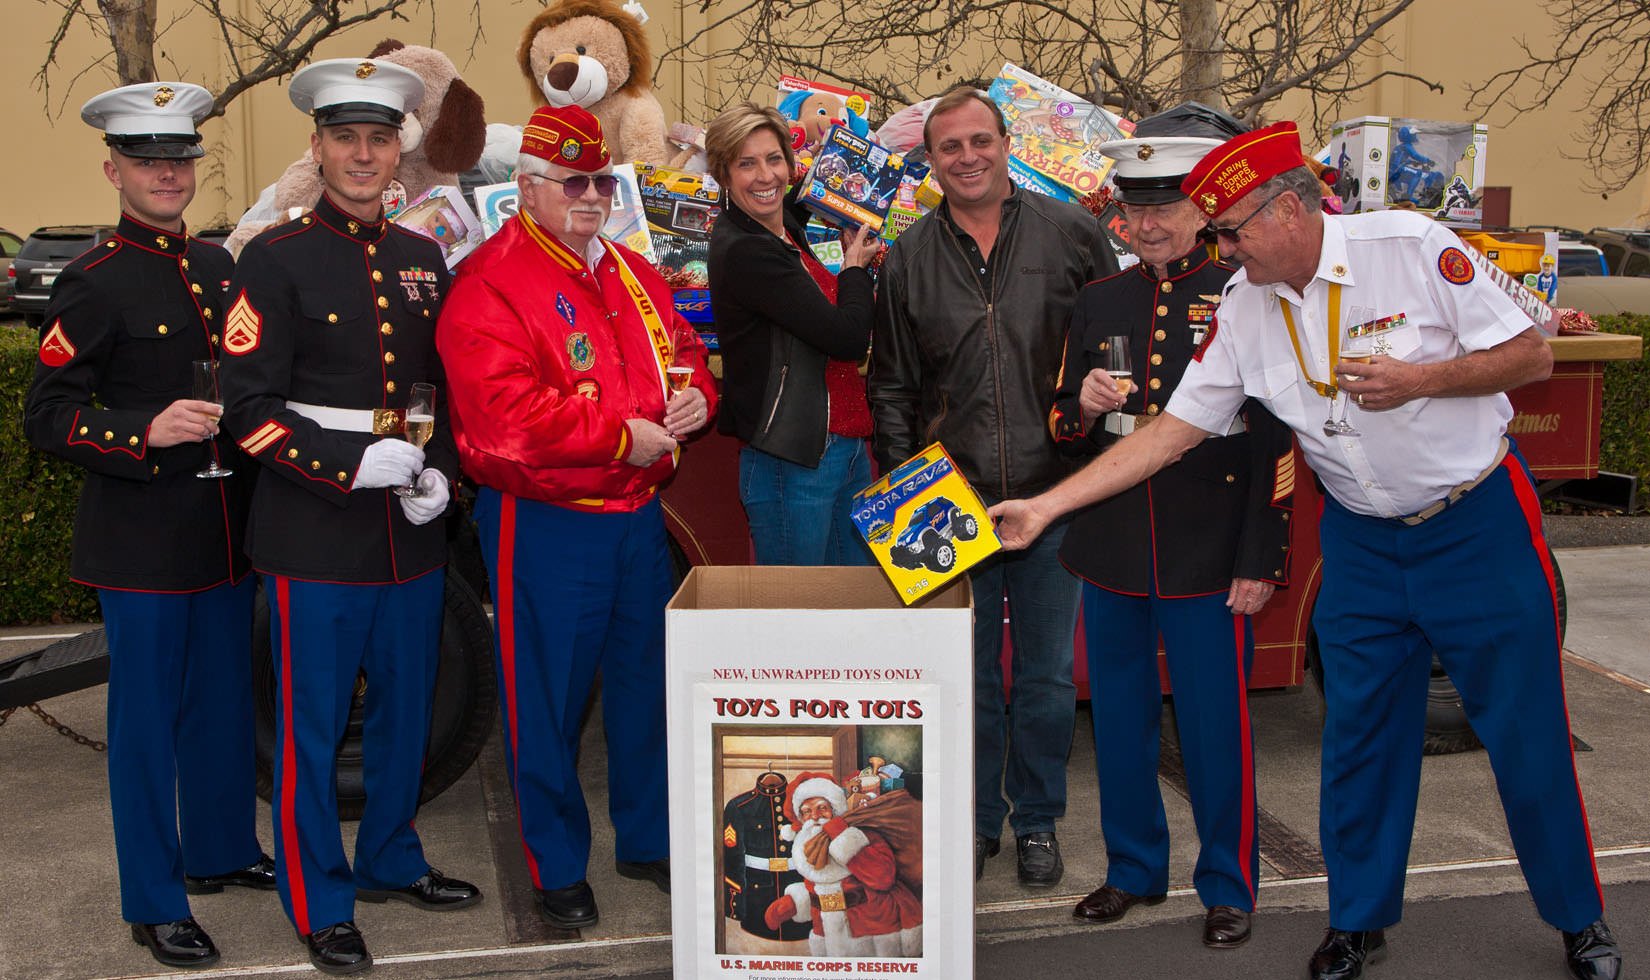 John Jordan, CEO and proprietor of Jordan Winery posing with Judy Jordan and members of the US Marine Reservists gathered at Jordan Winery for a toy drive